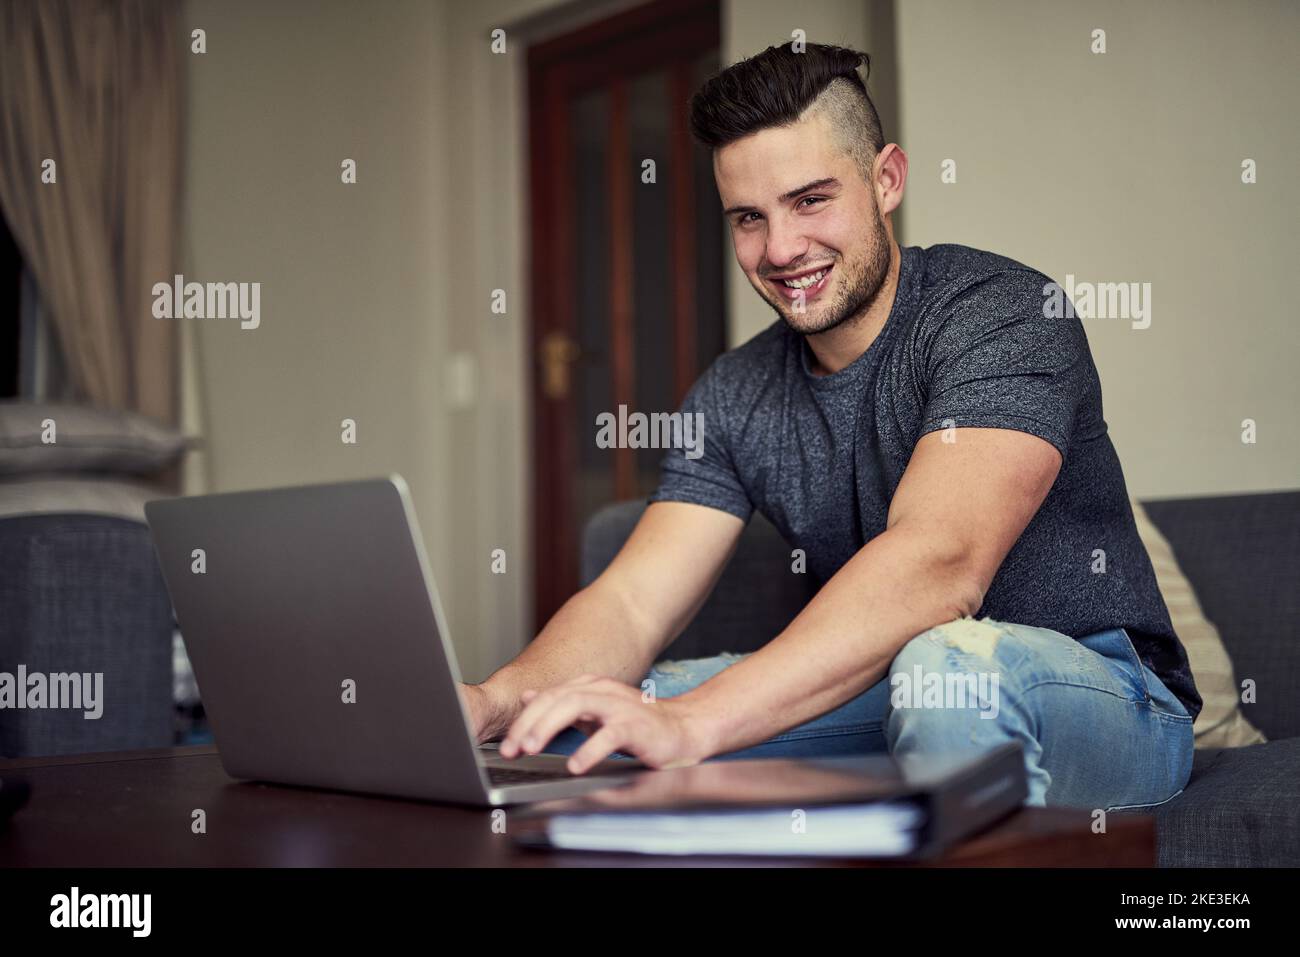 Work hard and make it happen. Portrait of a happy young man using his laptop to work from home. Stock Photo